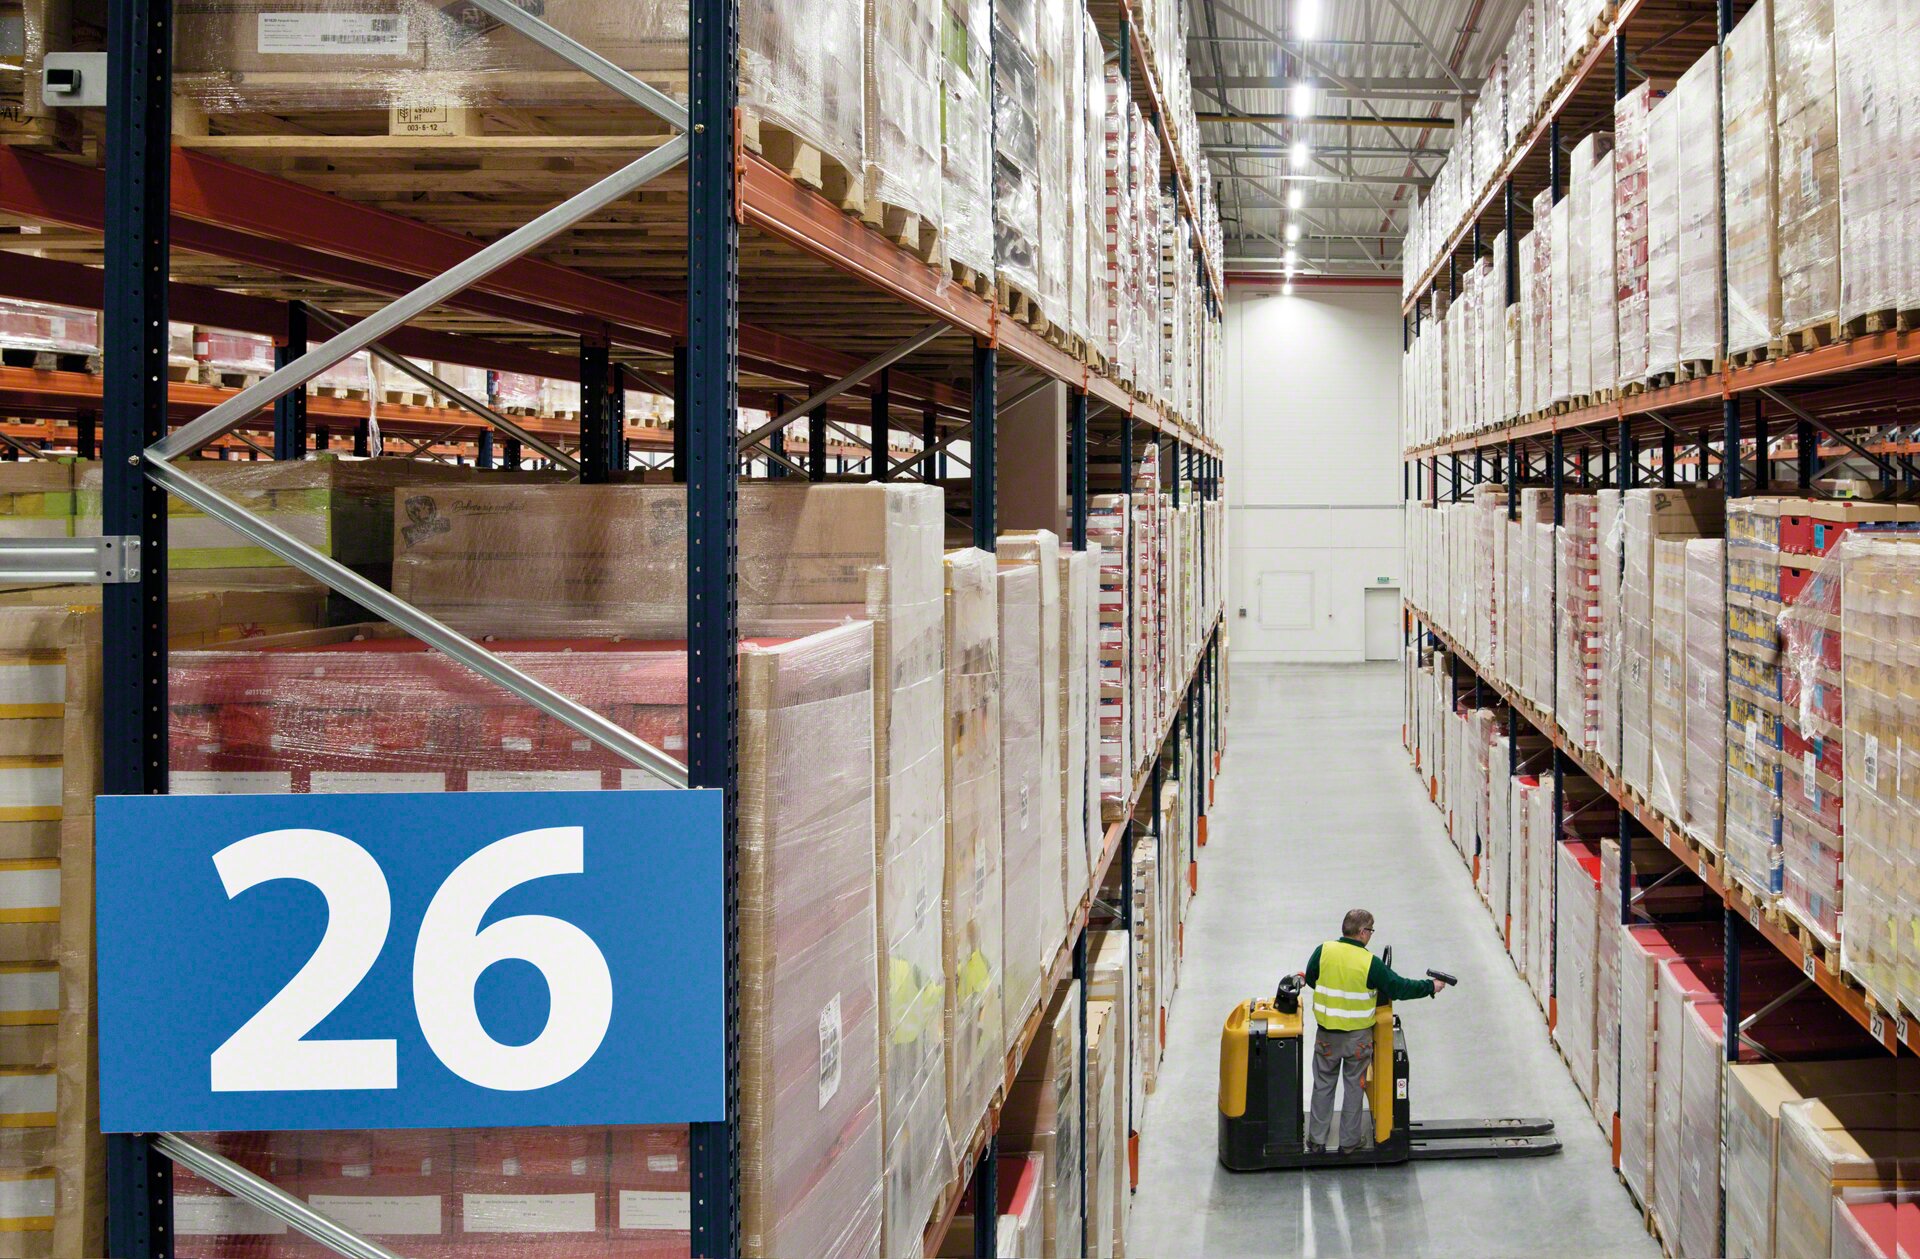 Easy WMS combined with RF Scanners used in a Selective warehouse environment